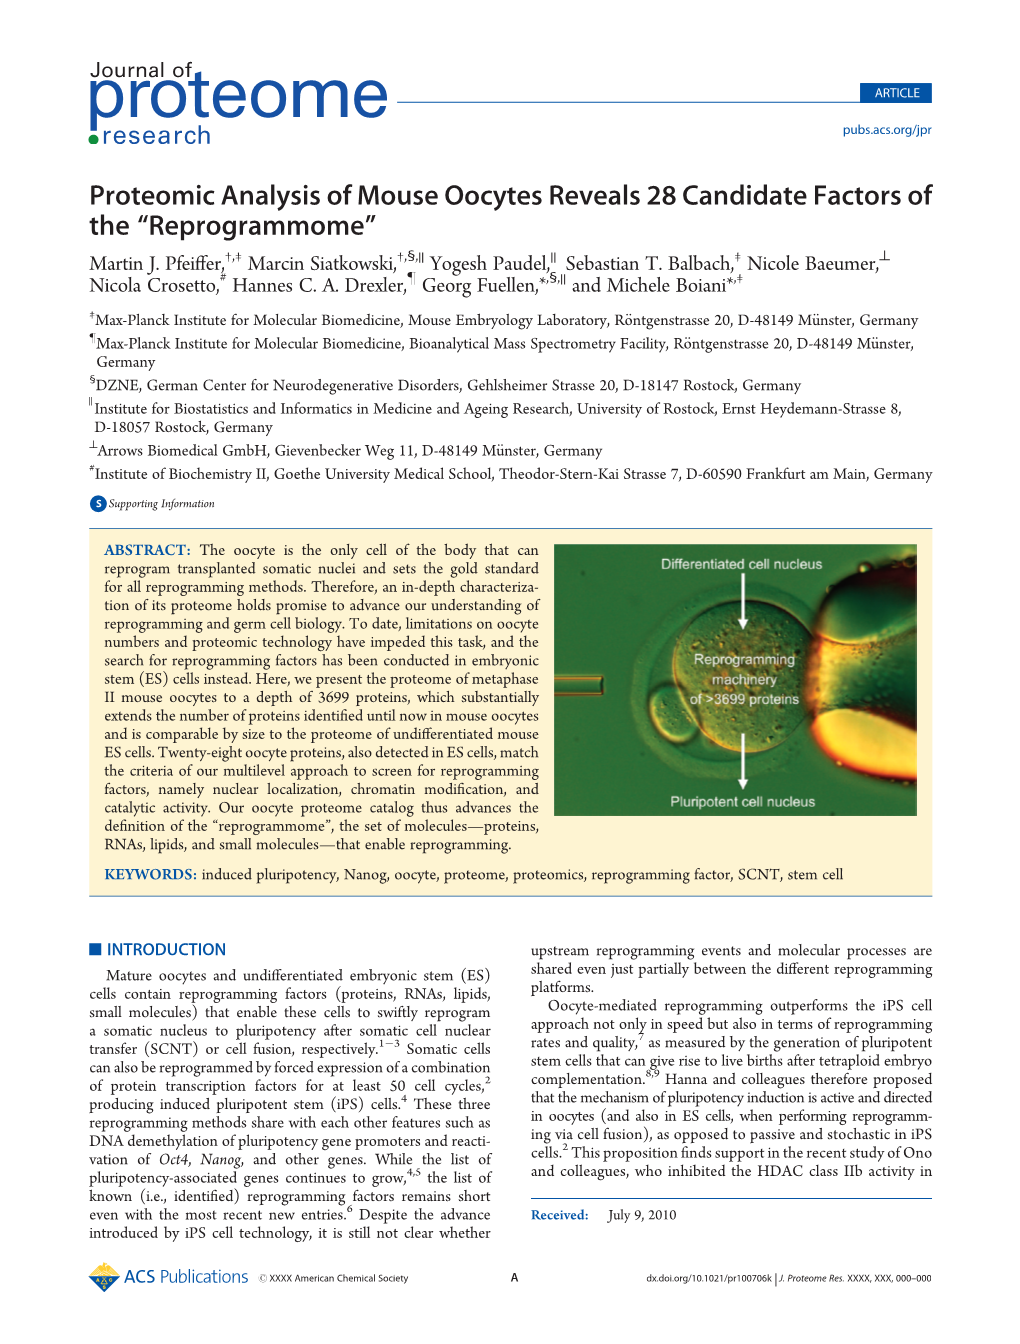 Proteomic Analysis of Mouse Oocytes Reveals 28 Candidate Factors of the “Reprogrammome” Martin J